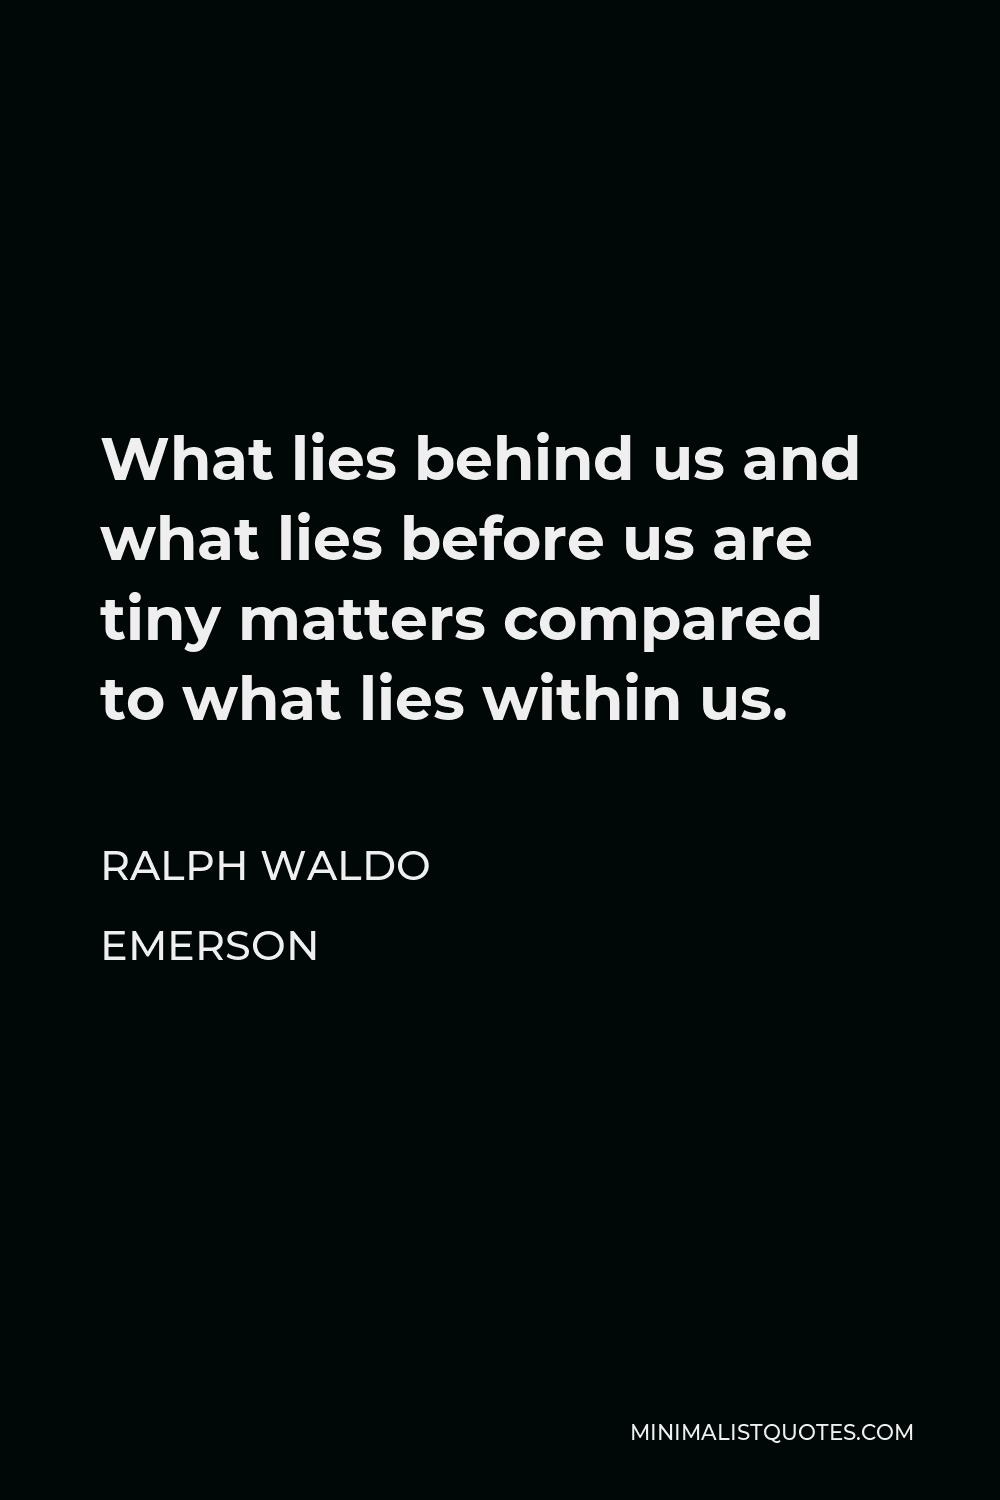 Ralph Waldo Emerson Quote What lies behind us and what lies ...